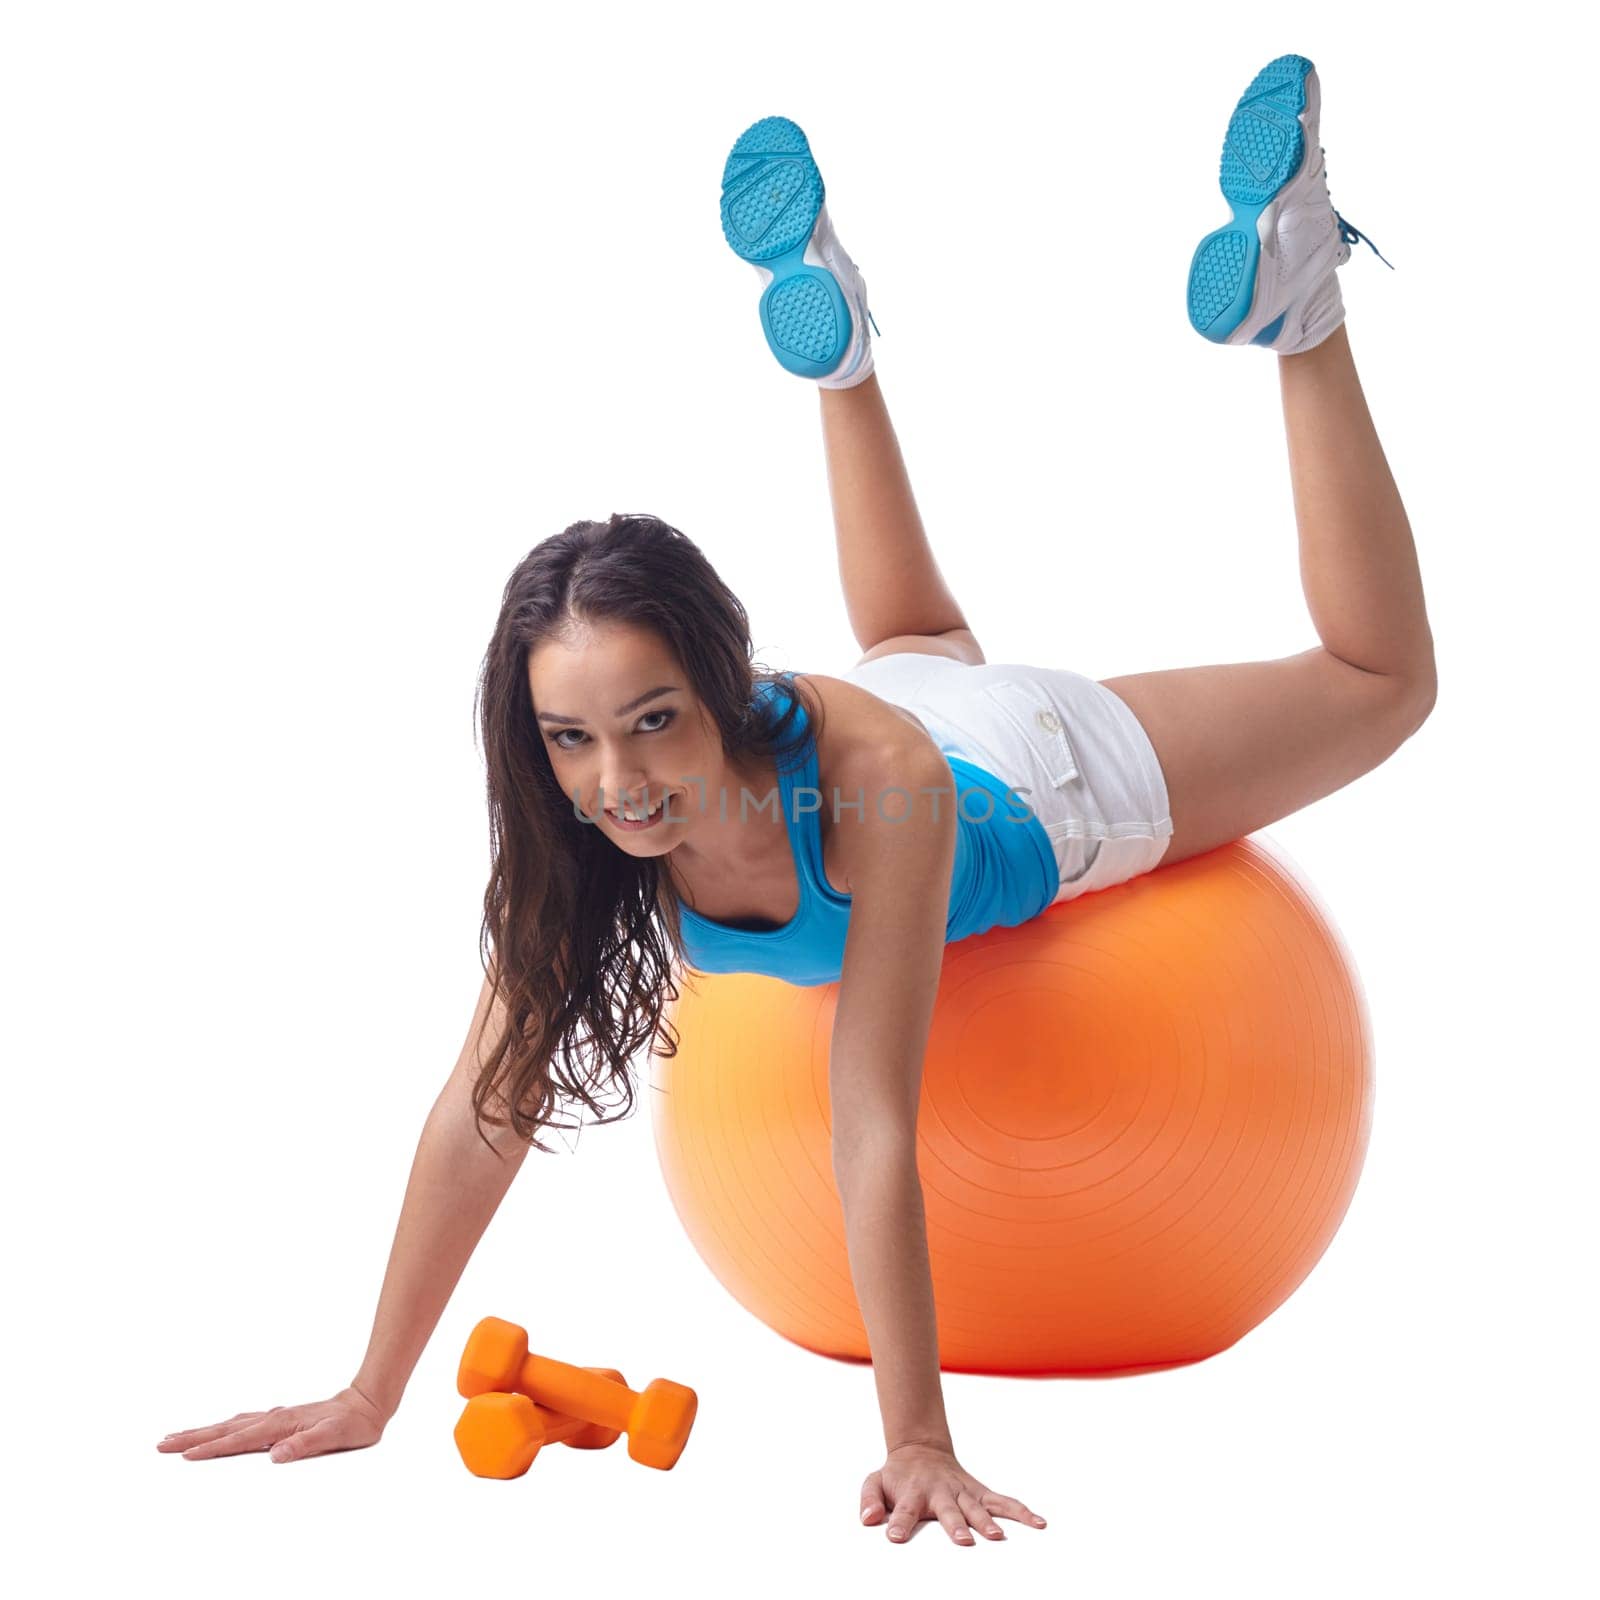 Sexy woman posing while exercising on fitness ball by rivertime